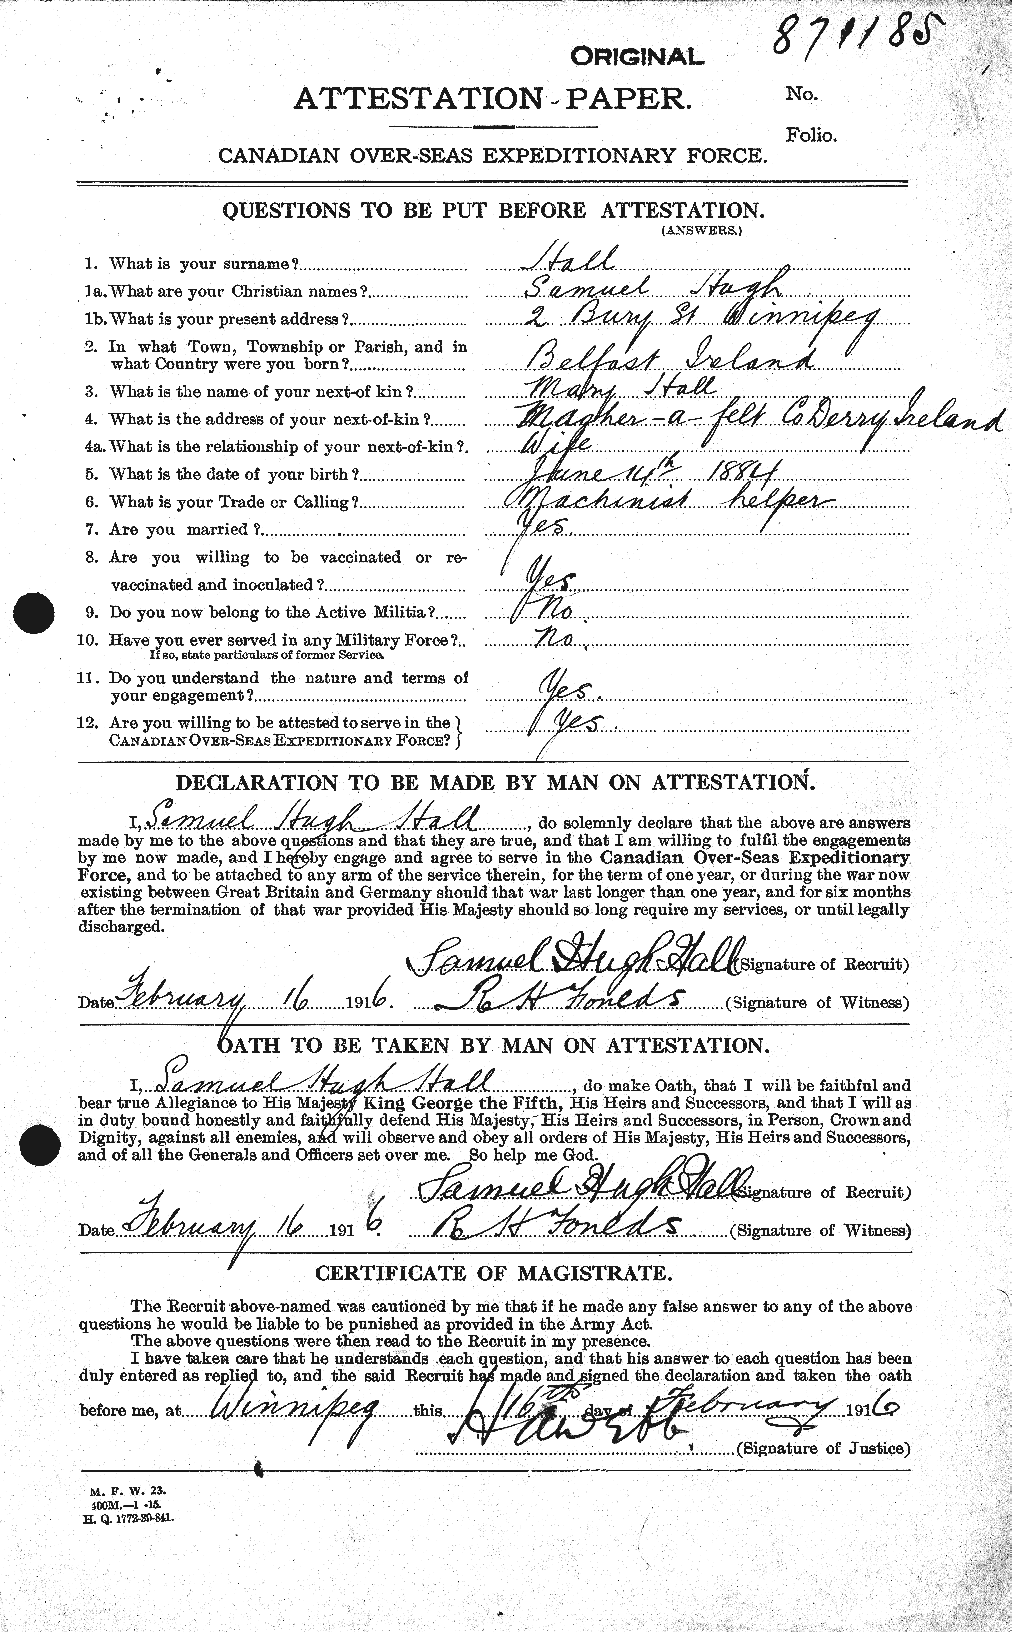 Personnel Records of the First World War - CEF 370769a